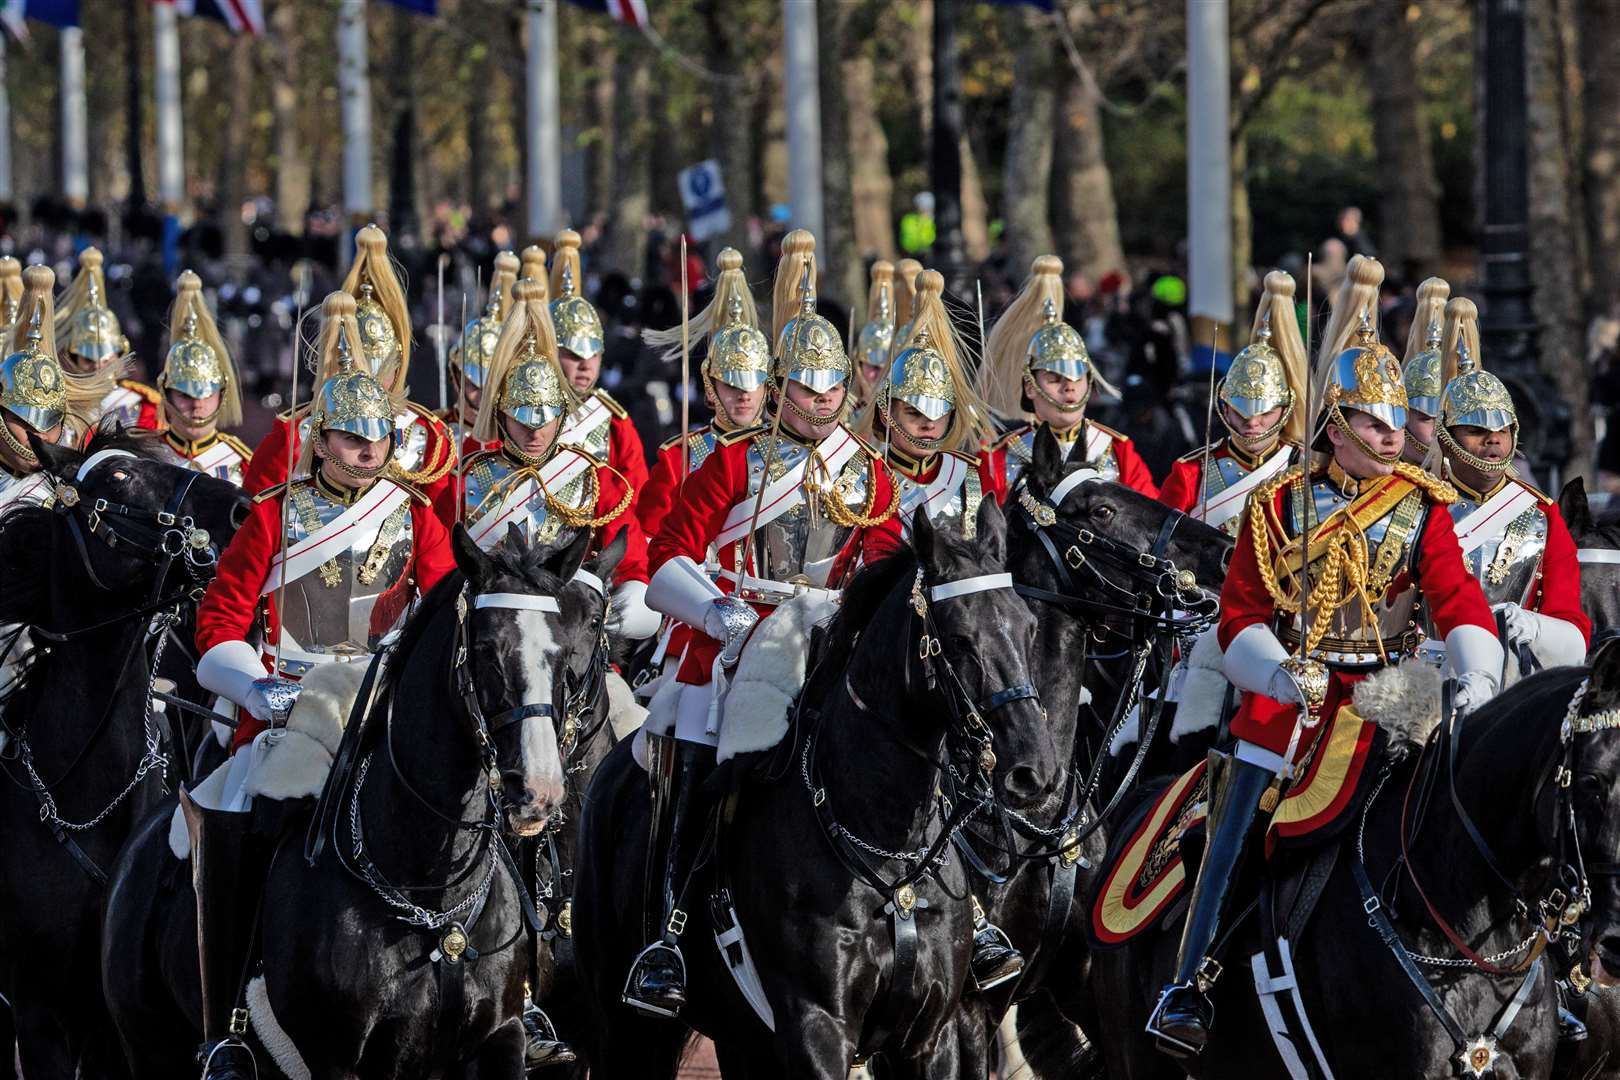 A large procession will escort the King and Queen back to Buckingham Palace. Image: MOD.